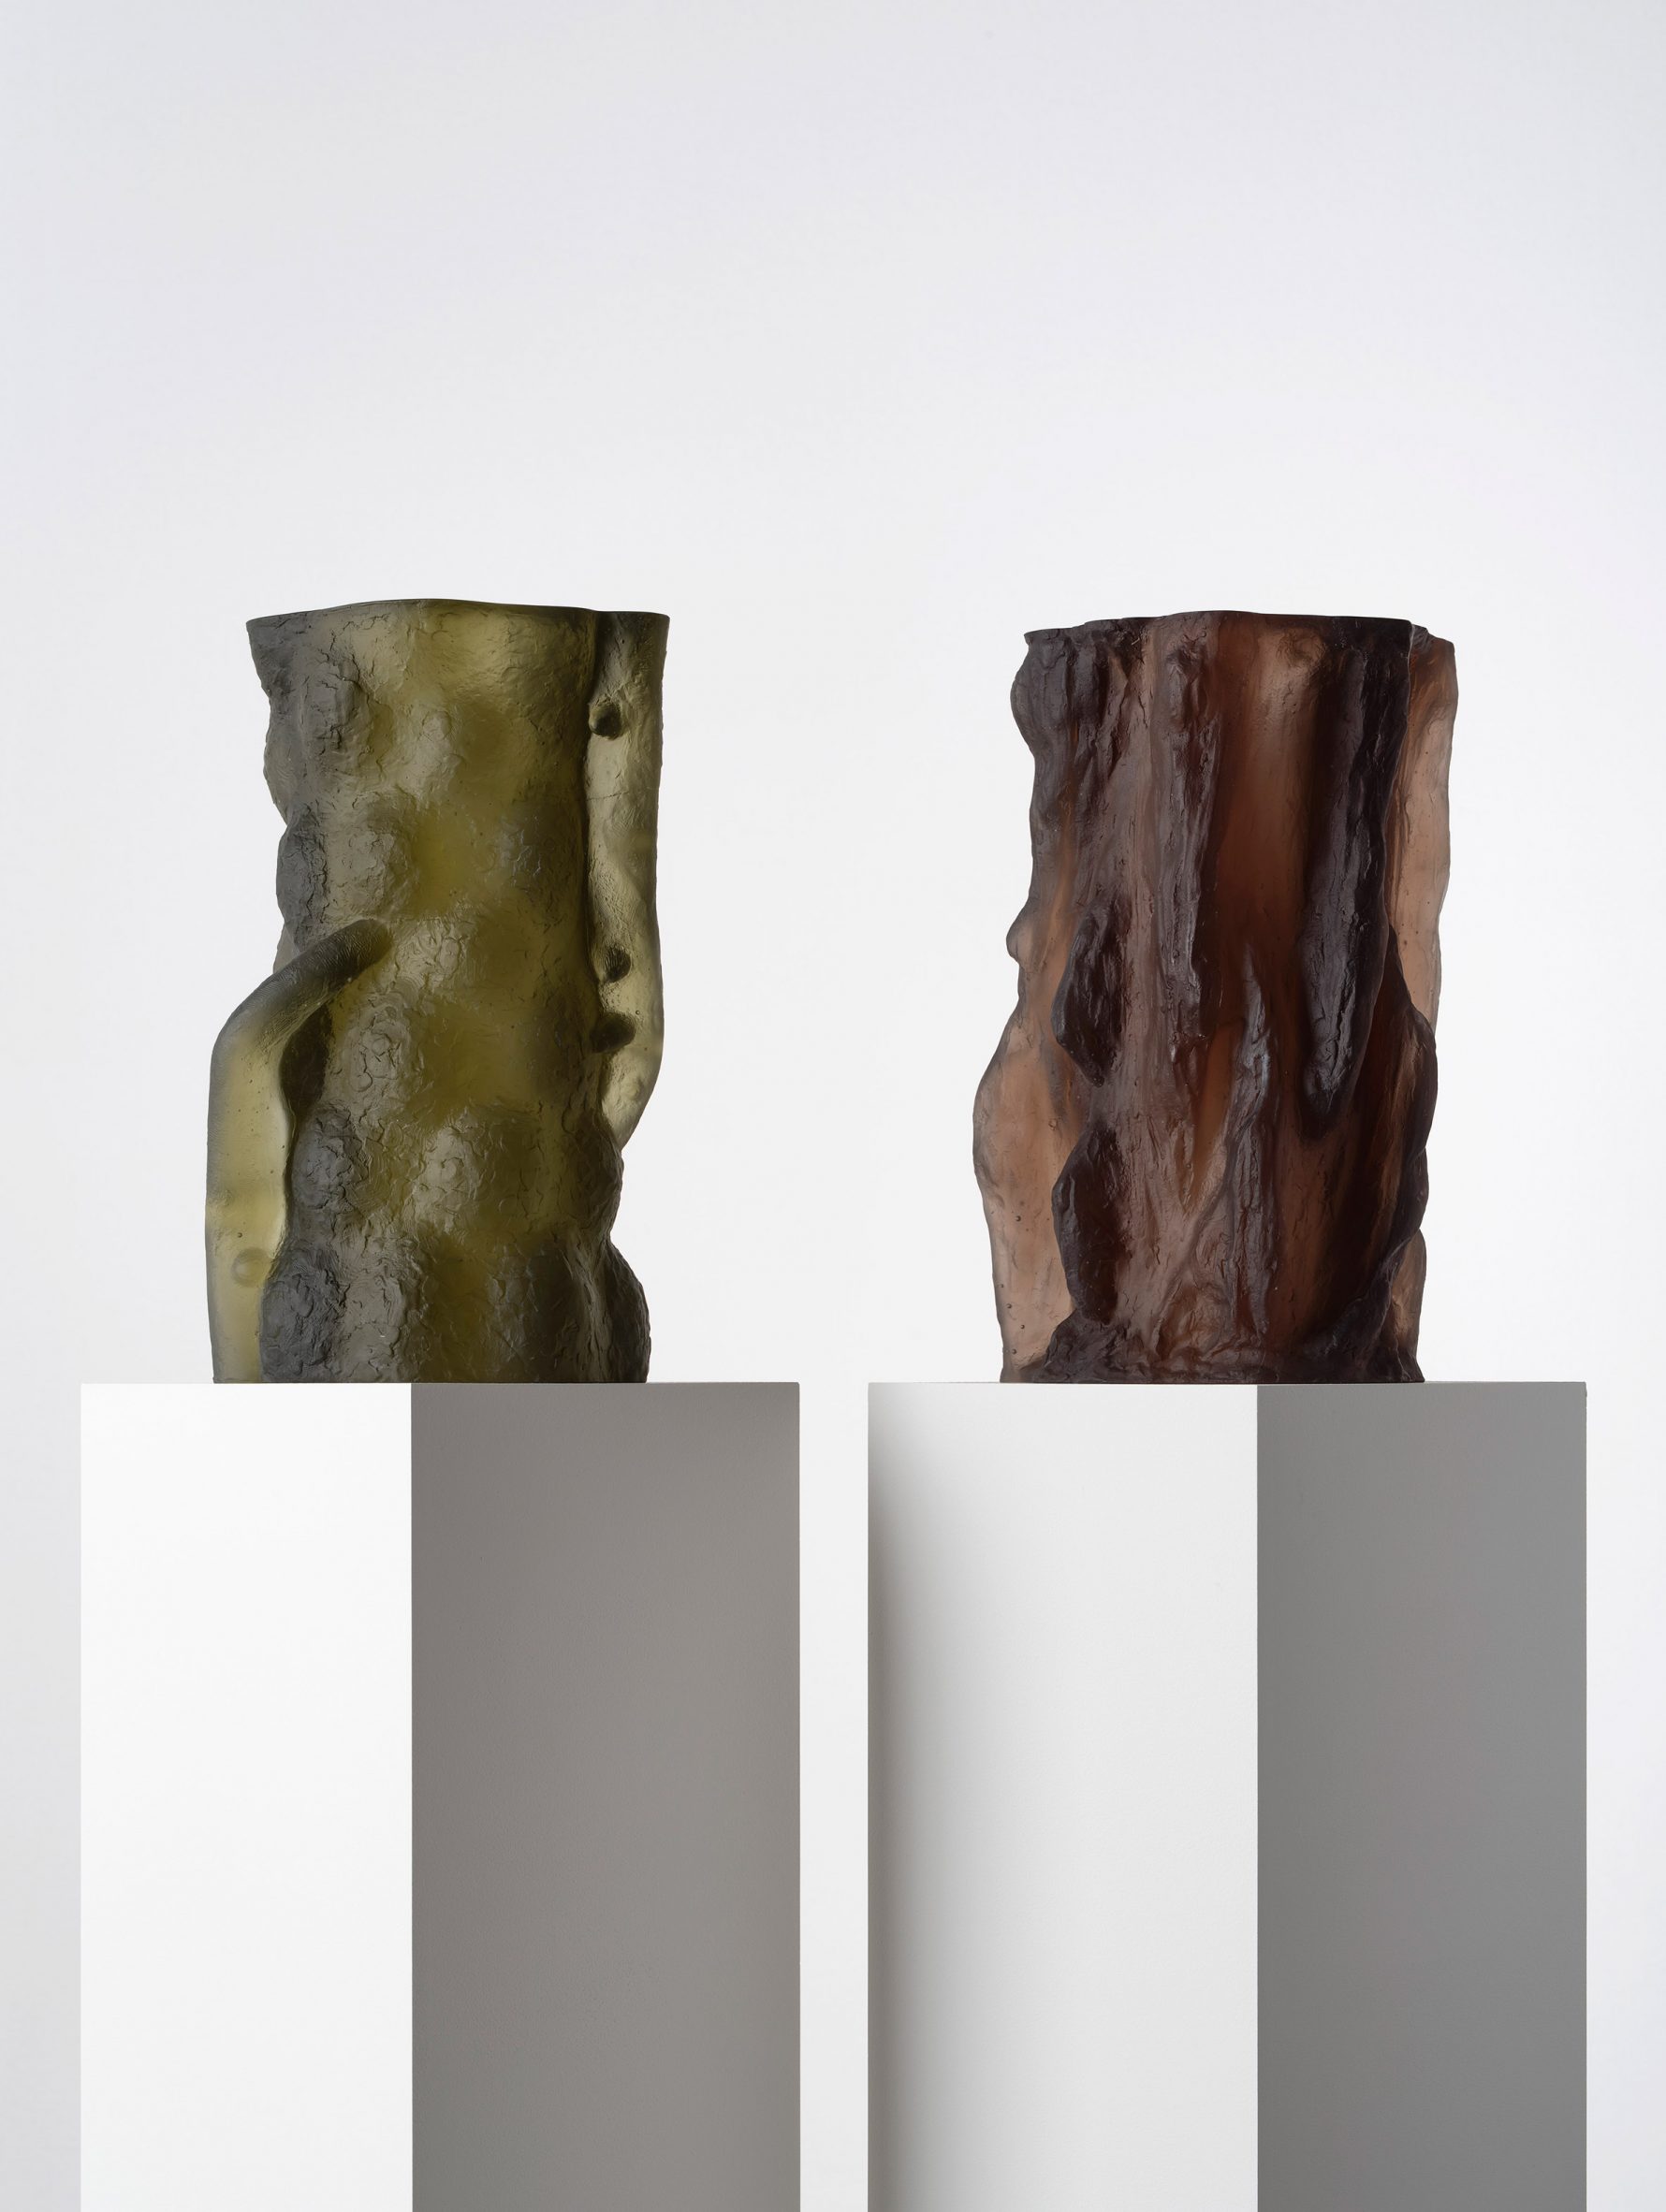 Photograph showing a green and brown-toned textural glass sculptures on white plinths